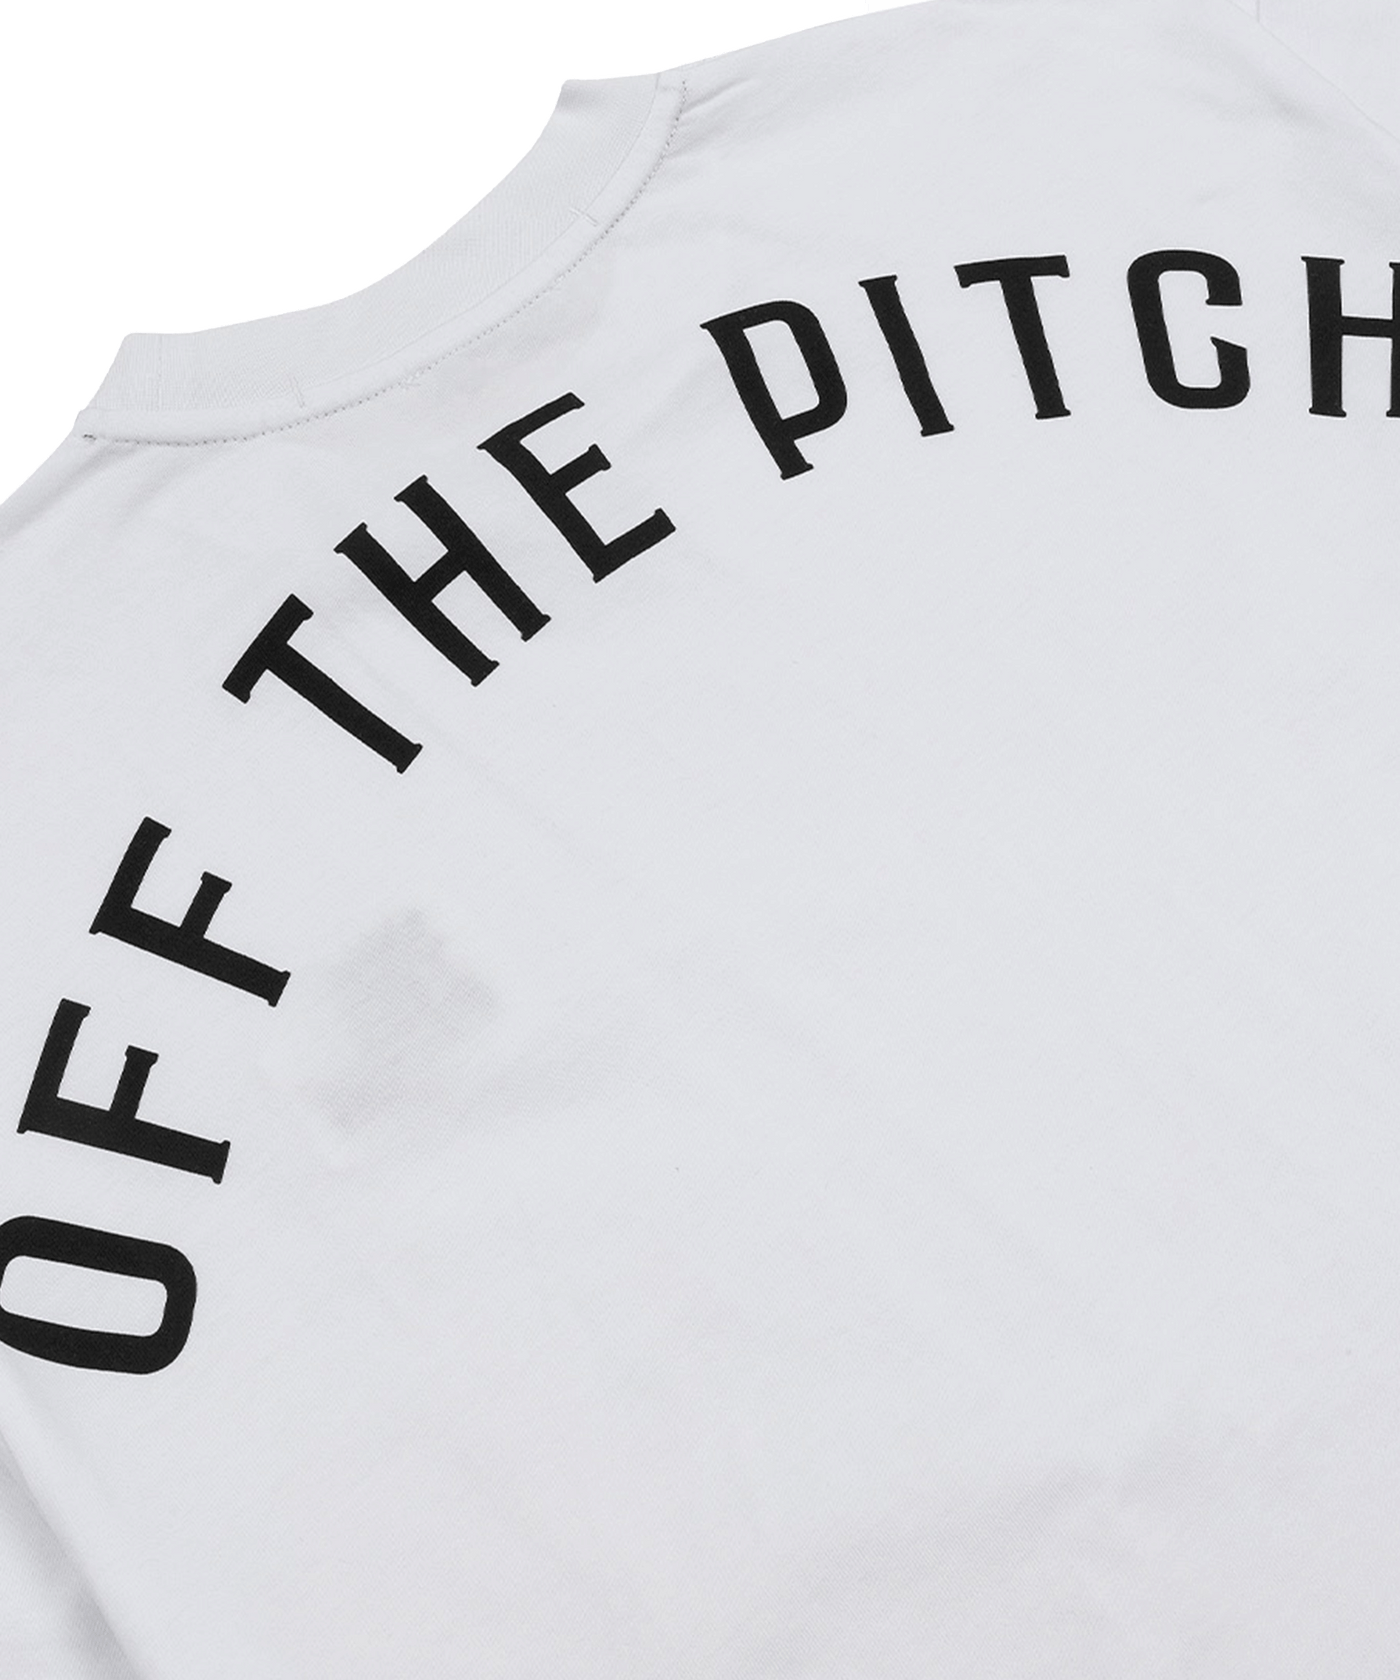 Off The Pitch - Otp231033 - Pitch T-shirt - 100 White